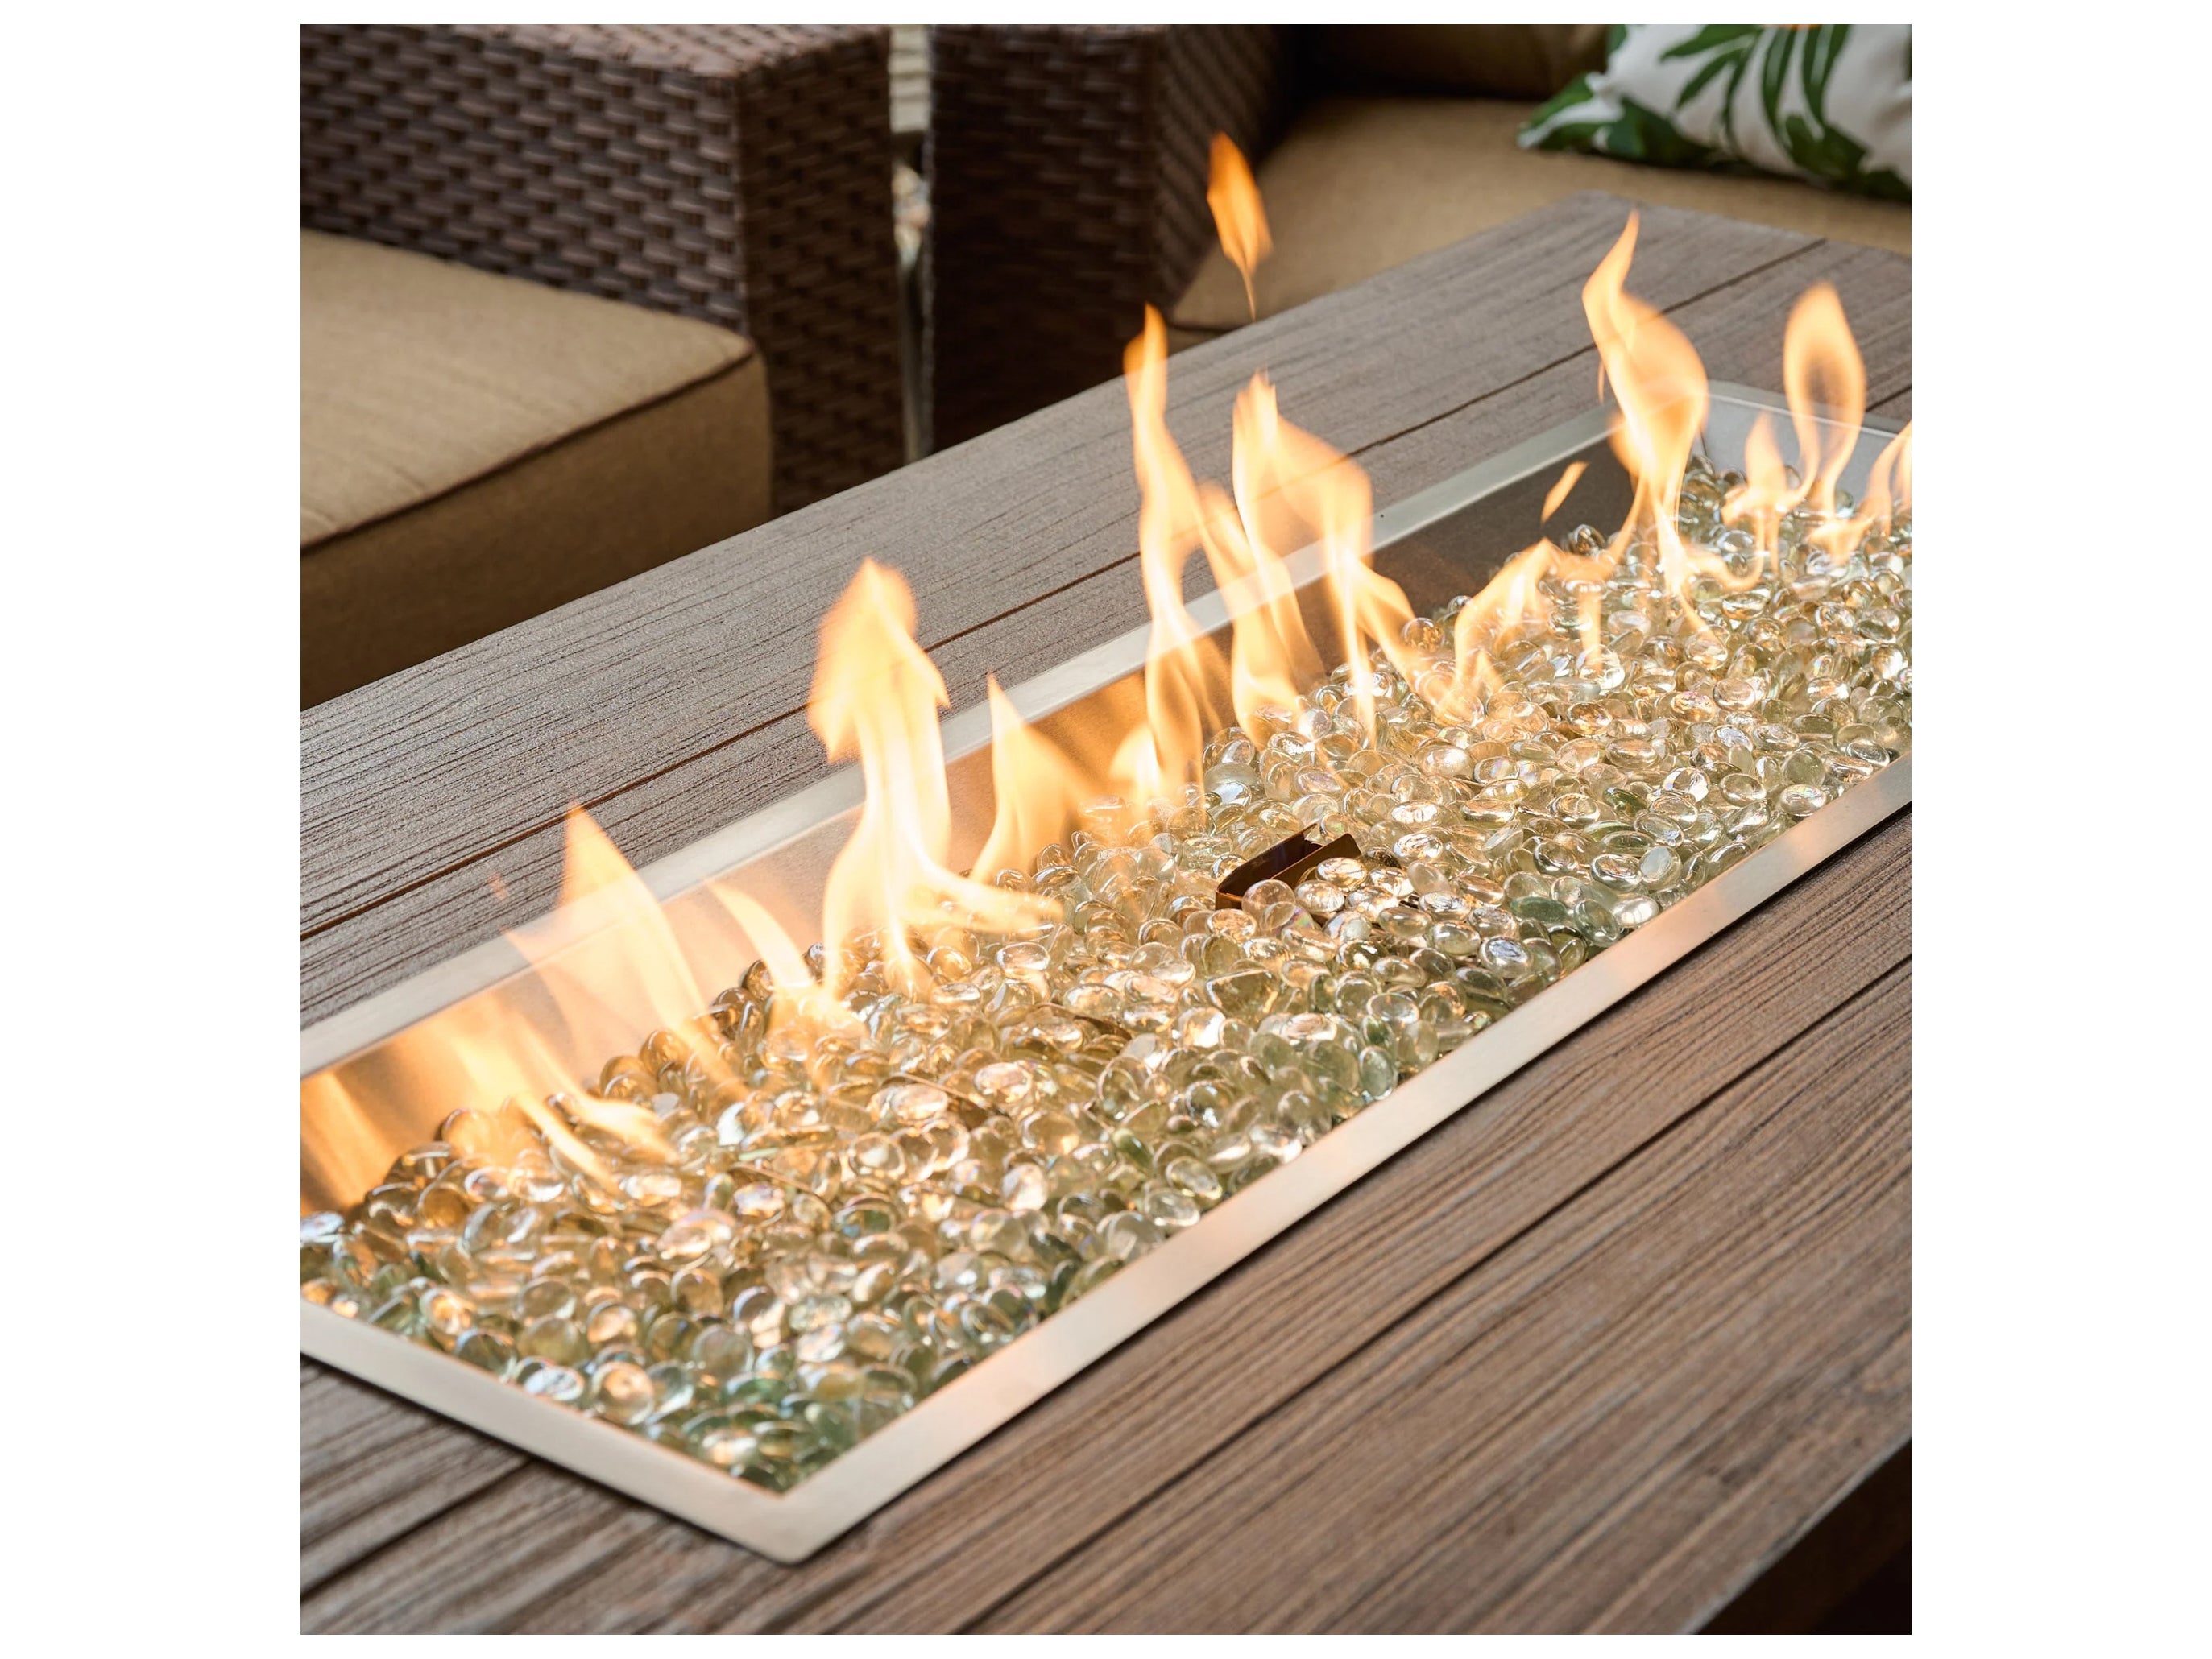 Outdoor Greatroom - 62’‘W x 30’'D - Havenwood Steel Luverne Black Rectangular Driftwood Everblend Top Gas Fire Pit Table